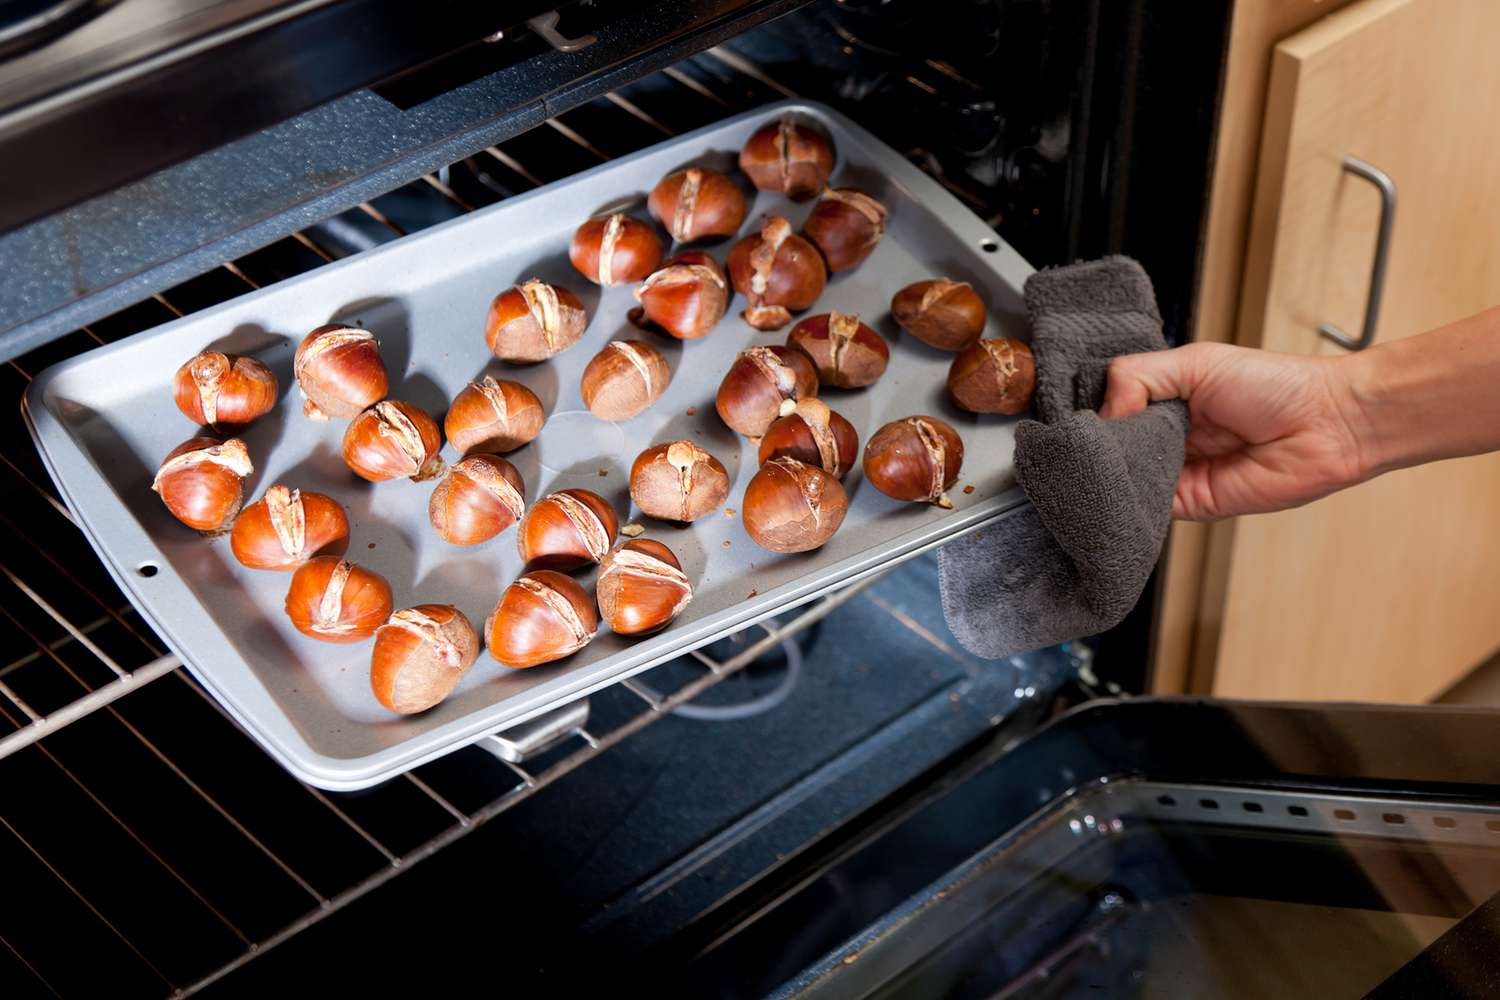 person taking baking sheet out of oven with roasted chestnuts